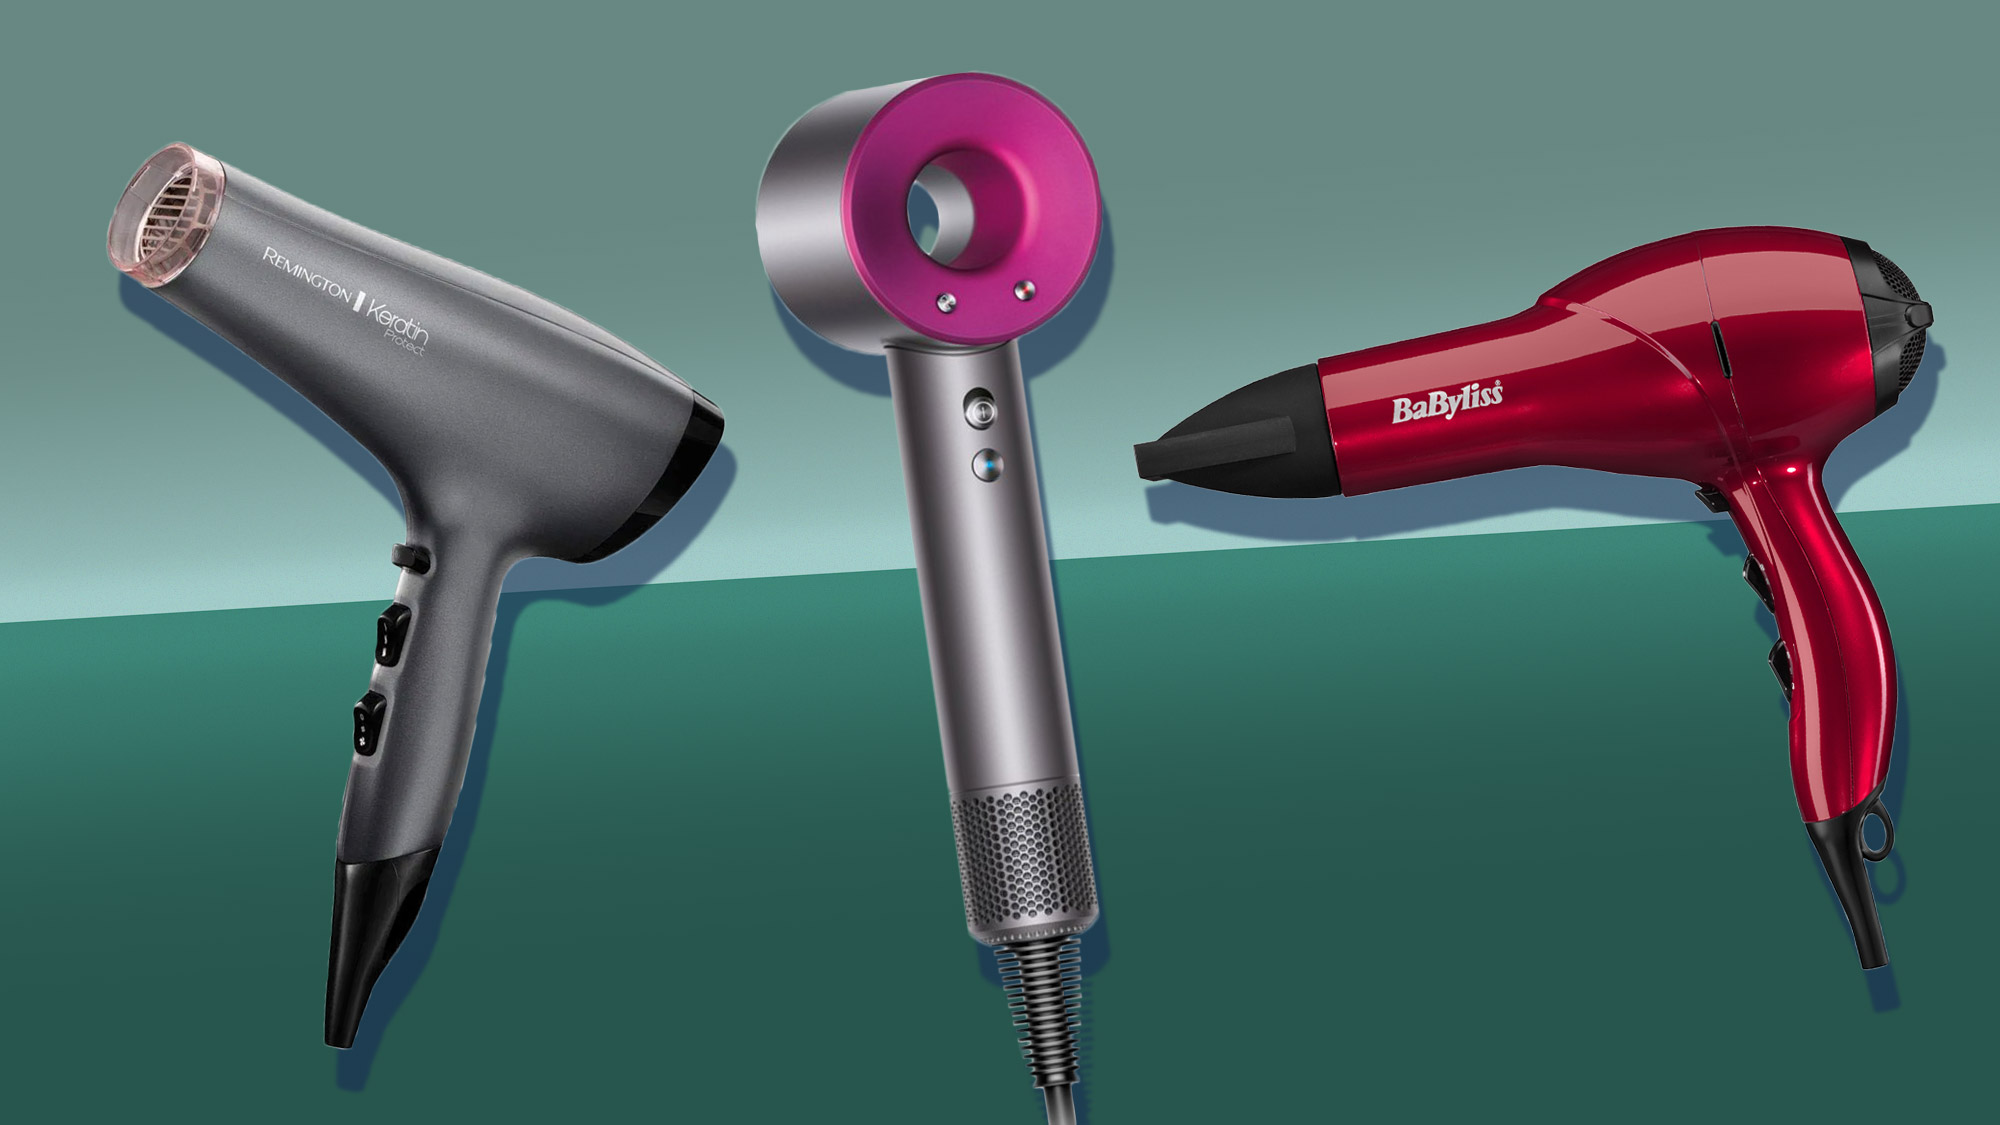 Best Travel Hair Dryer with Diffuser